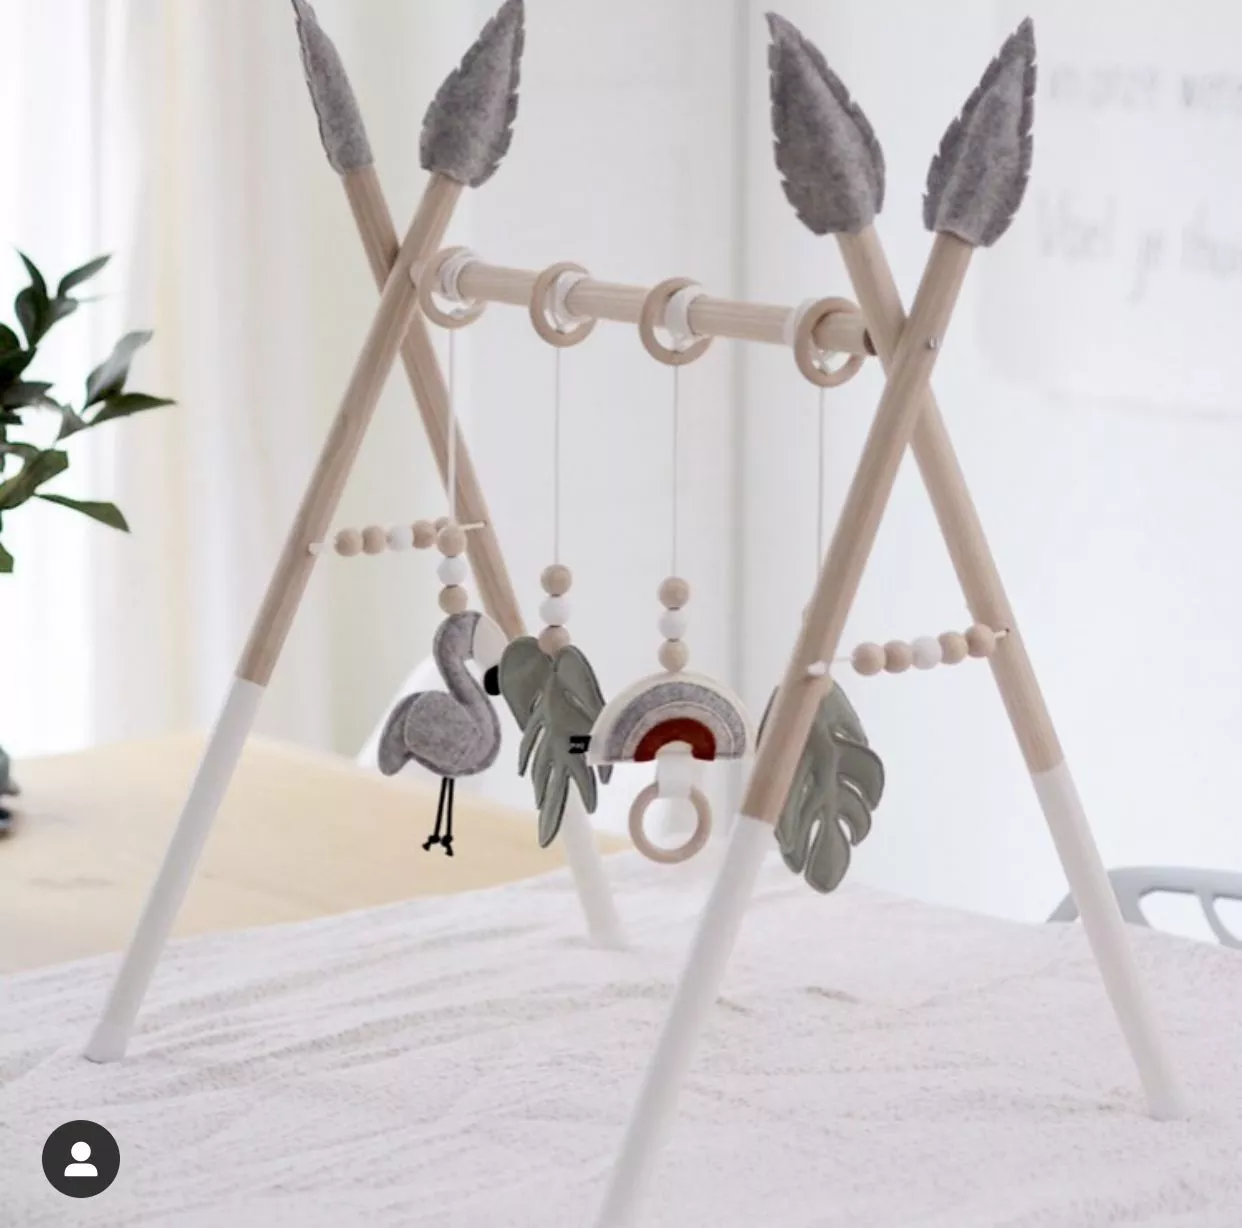 ?Nordic Wooden Baby Activity Gym Play Nursery Sensory Ring-pull Toy Fitness Frame Room Decor Clothes Rack Toy for Children